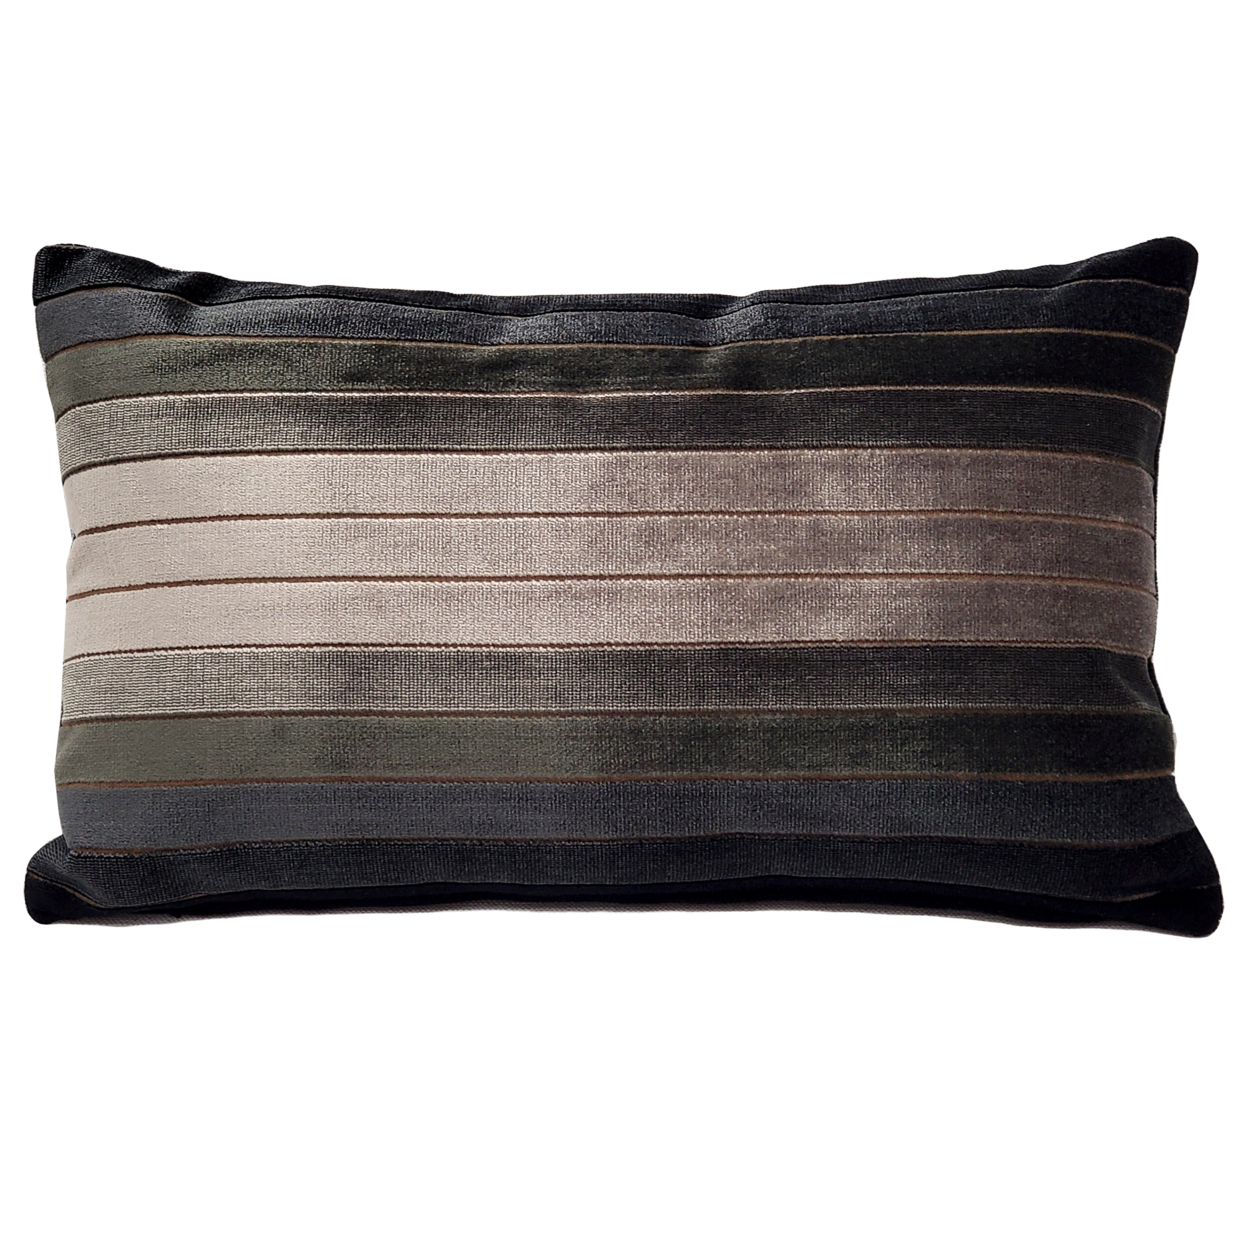 Carbon Stripes Textured Velvet Throw Pillow 12x19 Inches Square, Complete Pillow with Polyfill Pillow Insert